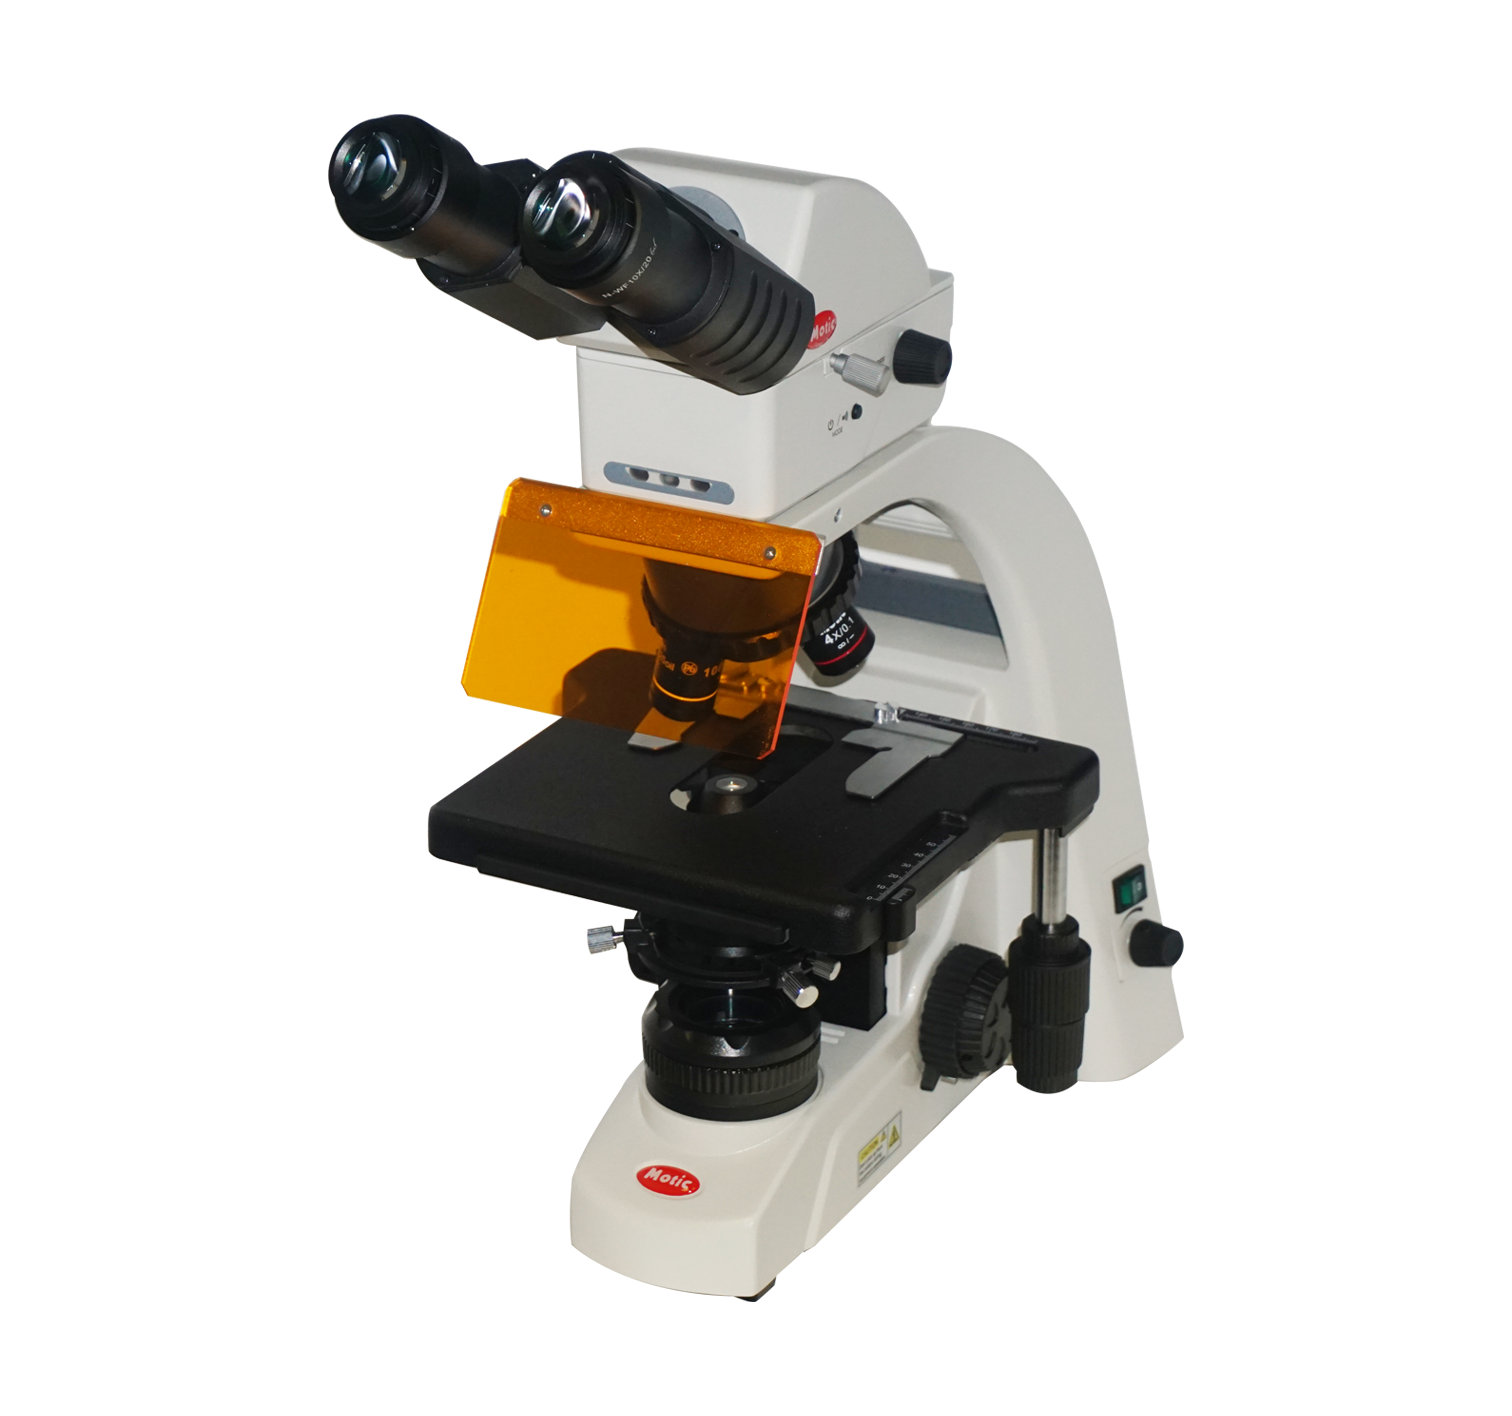 Microscope Monoculaire MOTIC 1802 LED